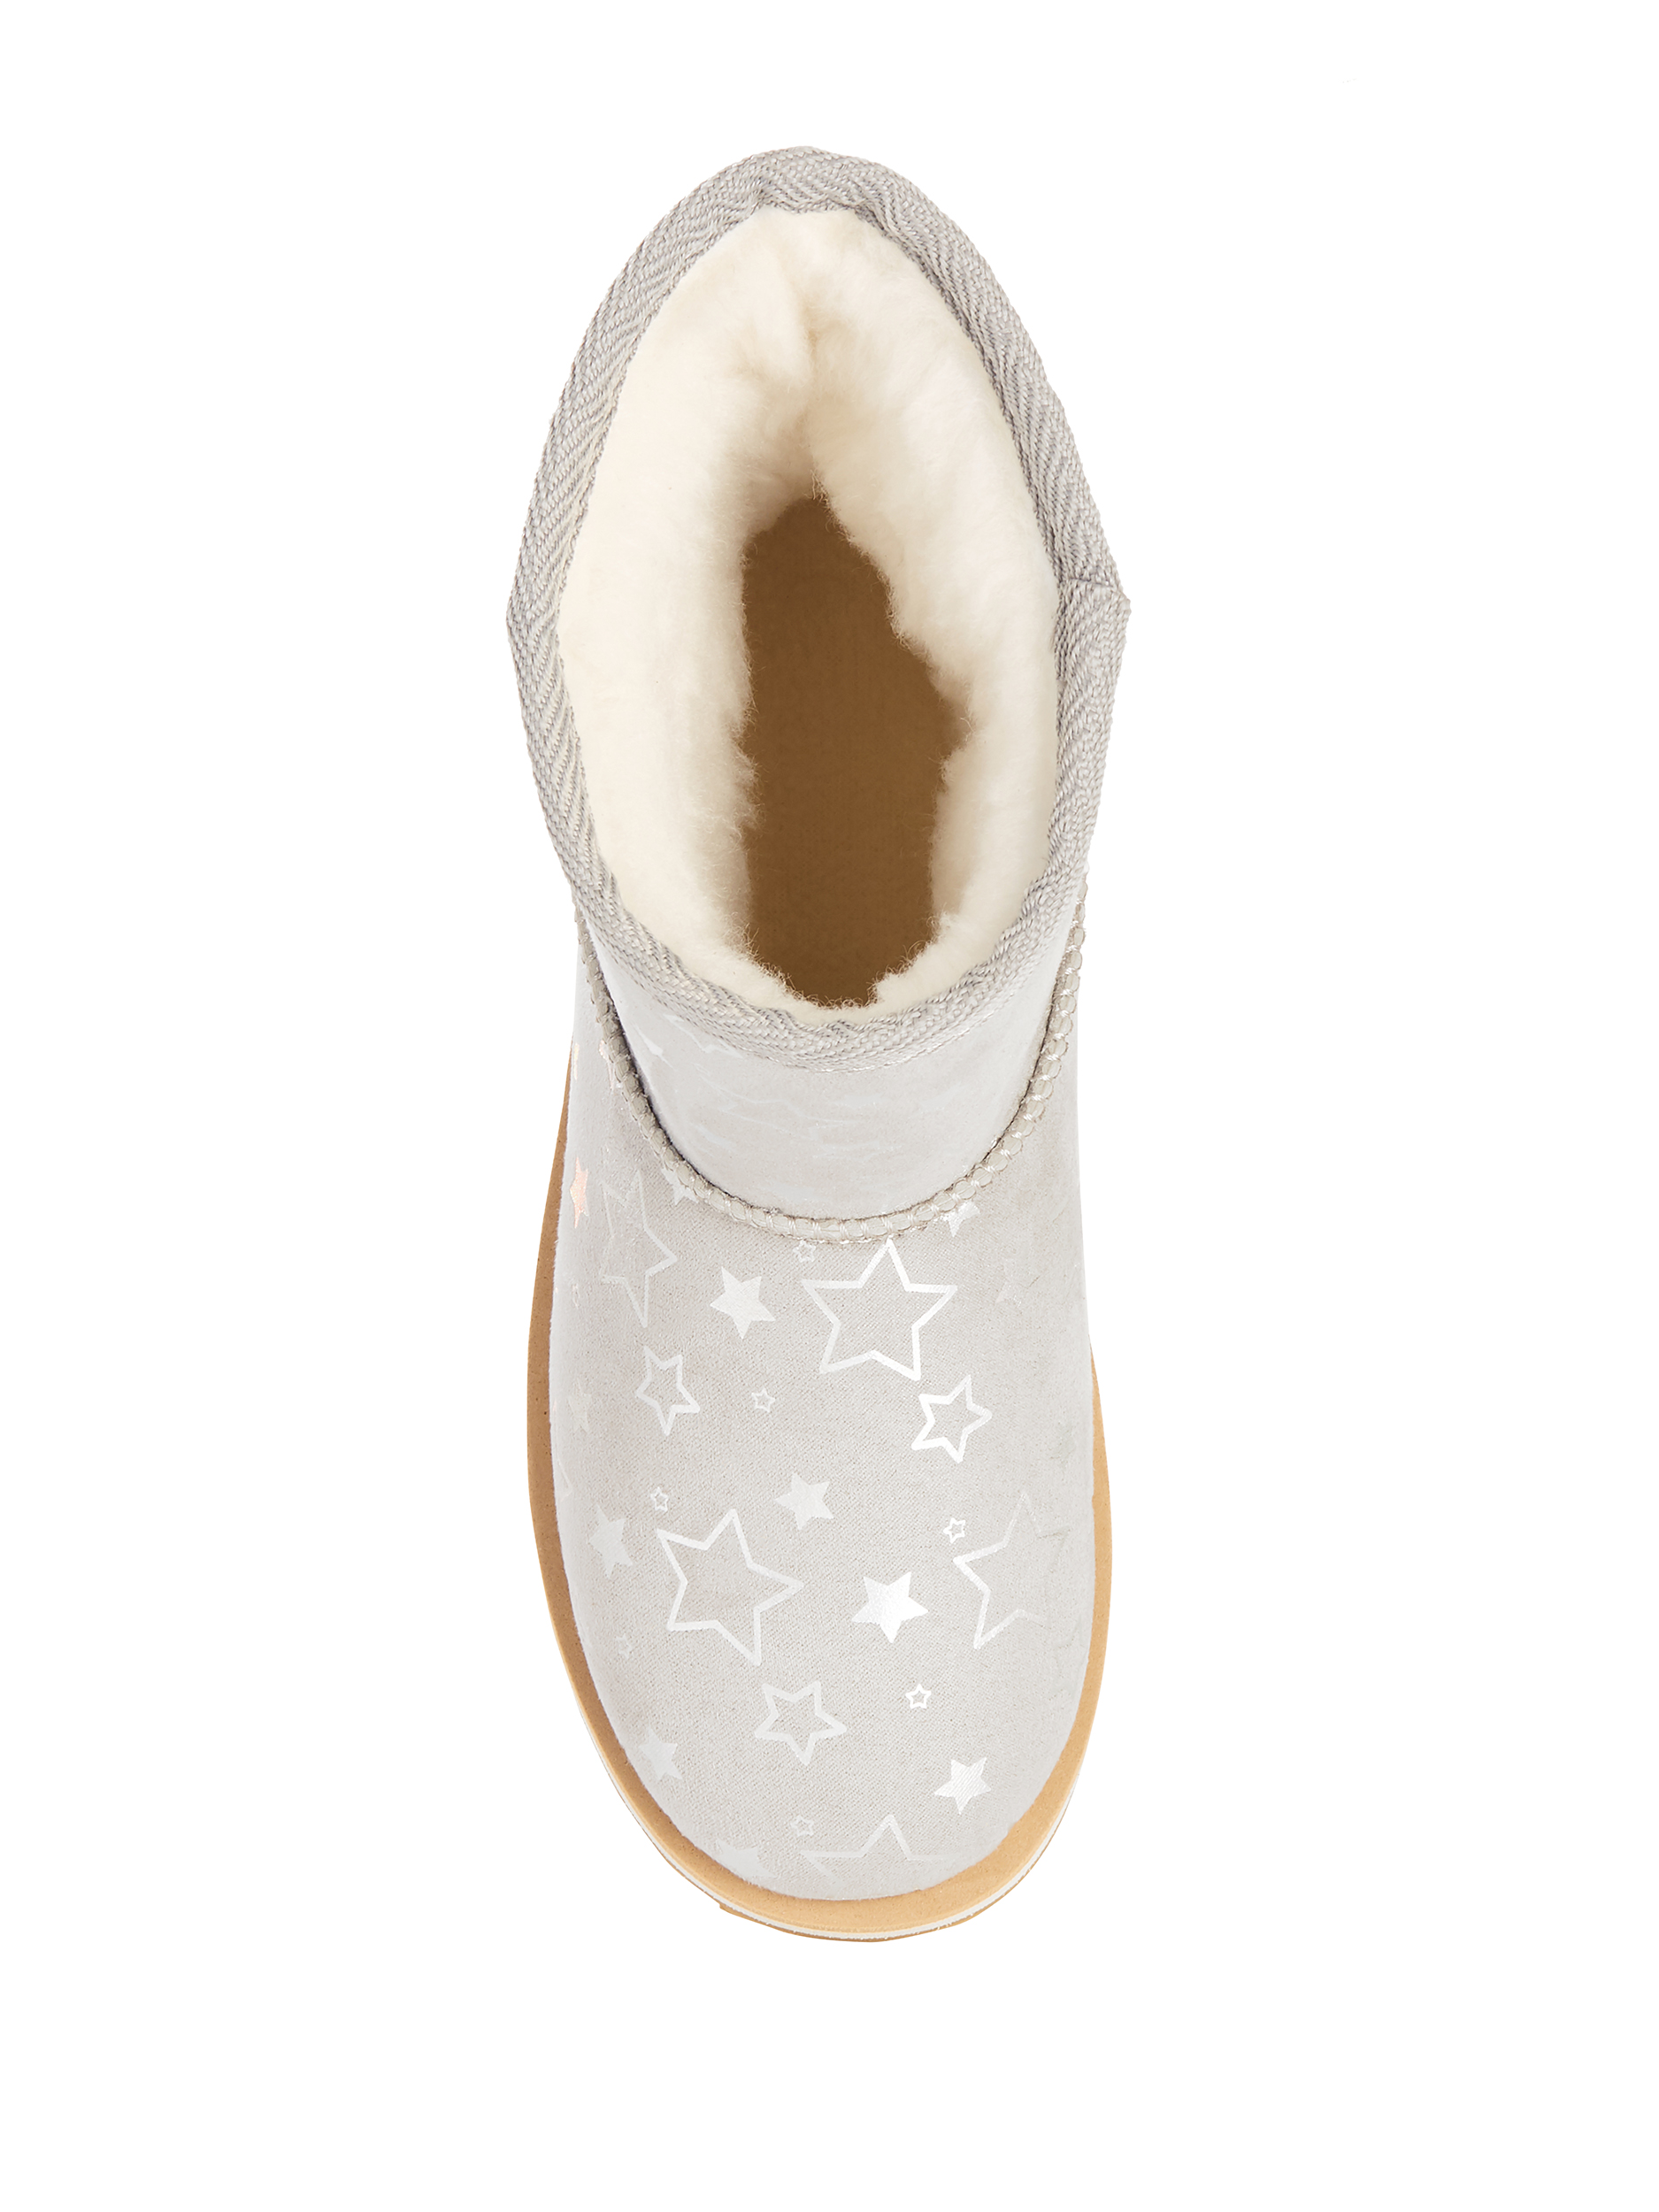 Wonder Nation Faux Shearling Boots (Toddler Girls) - image 4 of 6